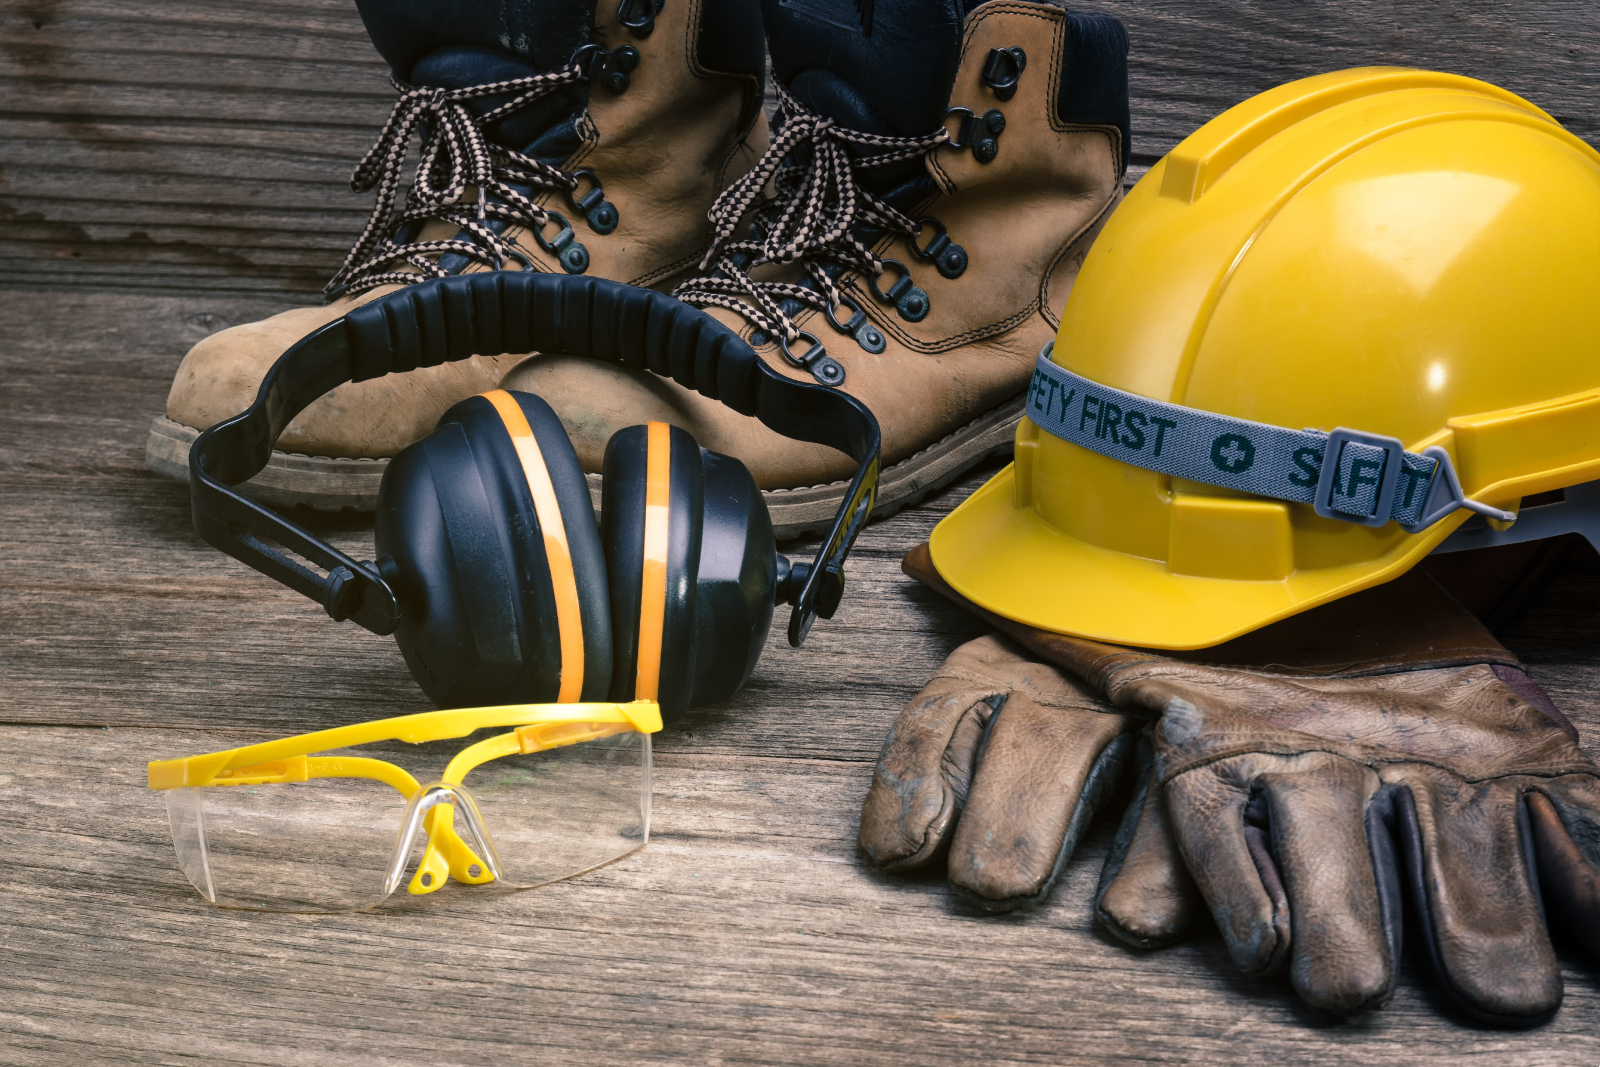 Image showing several items of PPE including a hard hat, gloves, ear defenders and safety glasses